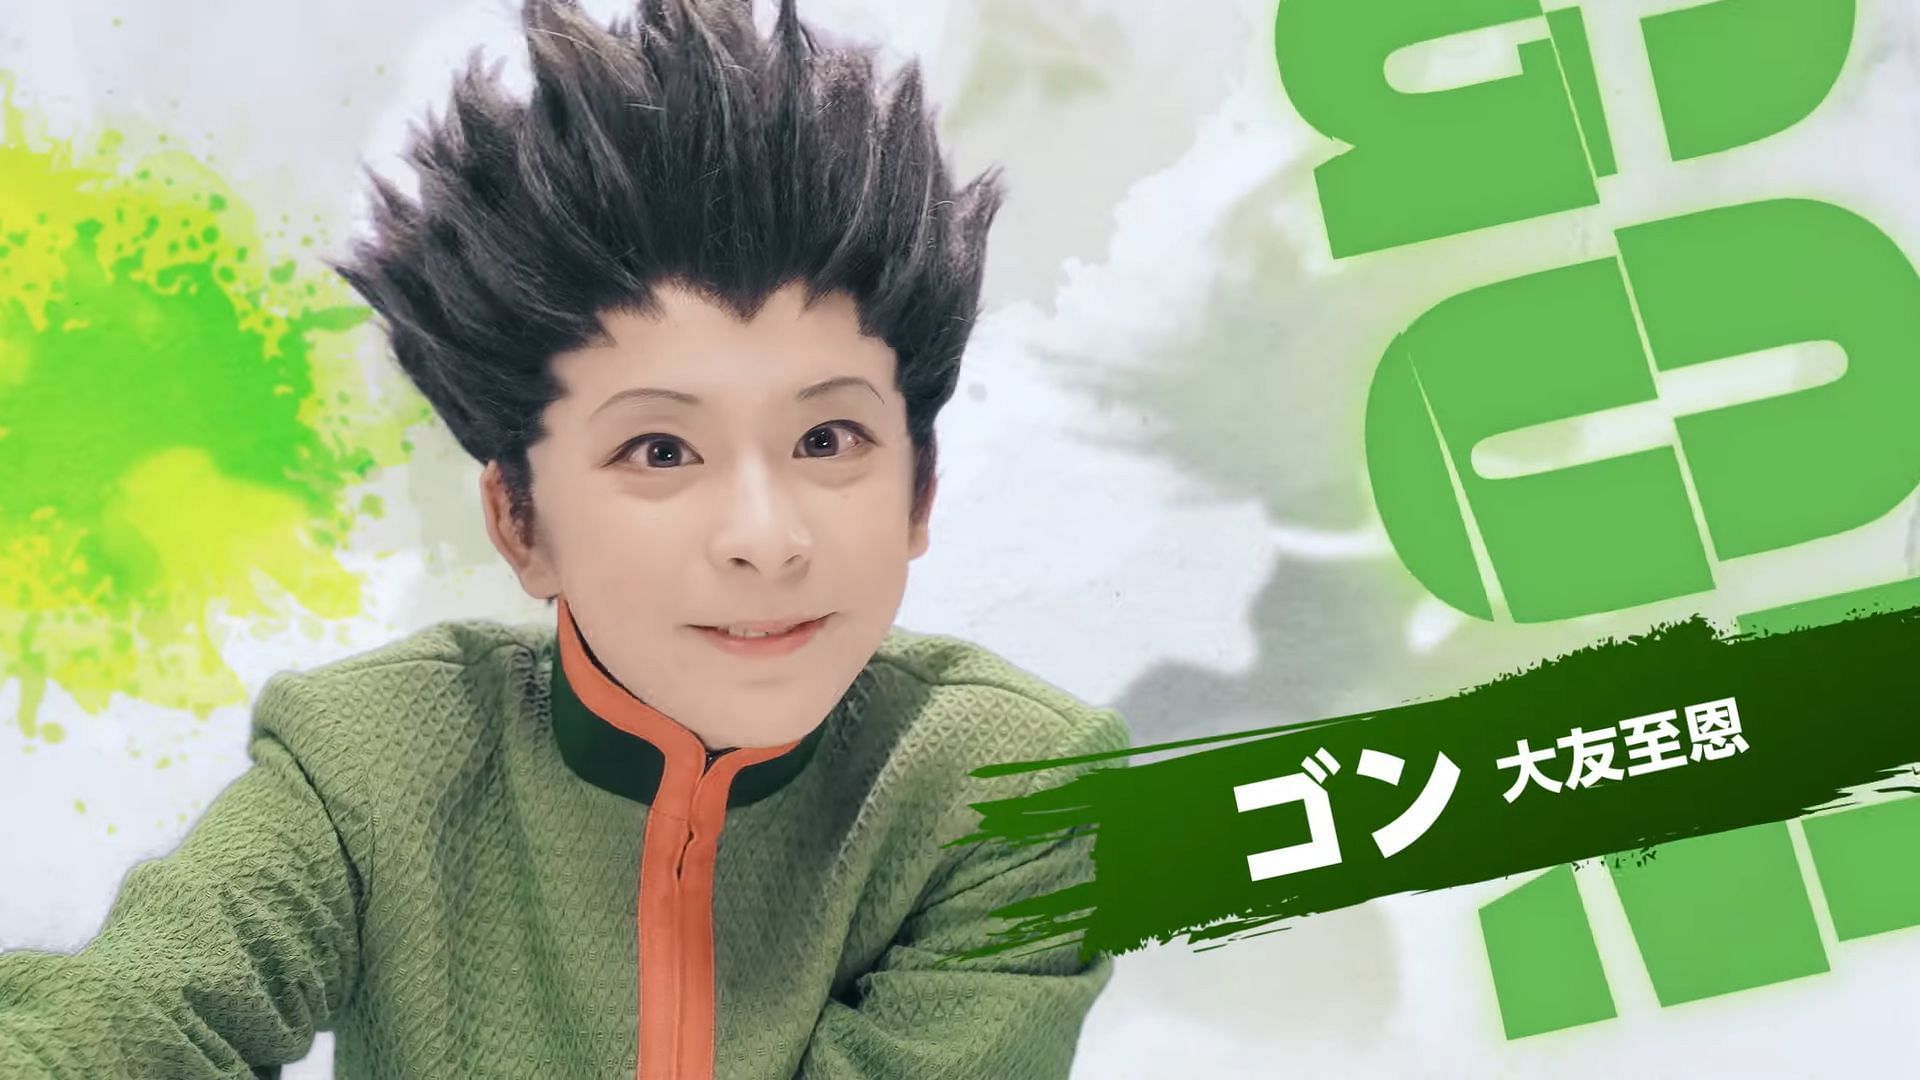 Yoshion Otomo as Gon Freecss in Stage Play commercial (Image via Hunter x Hunter The Stage YouTube Channel)